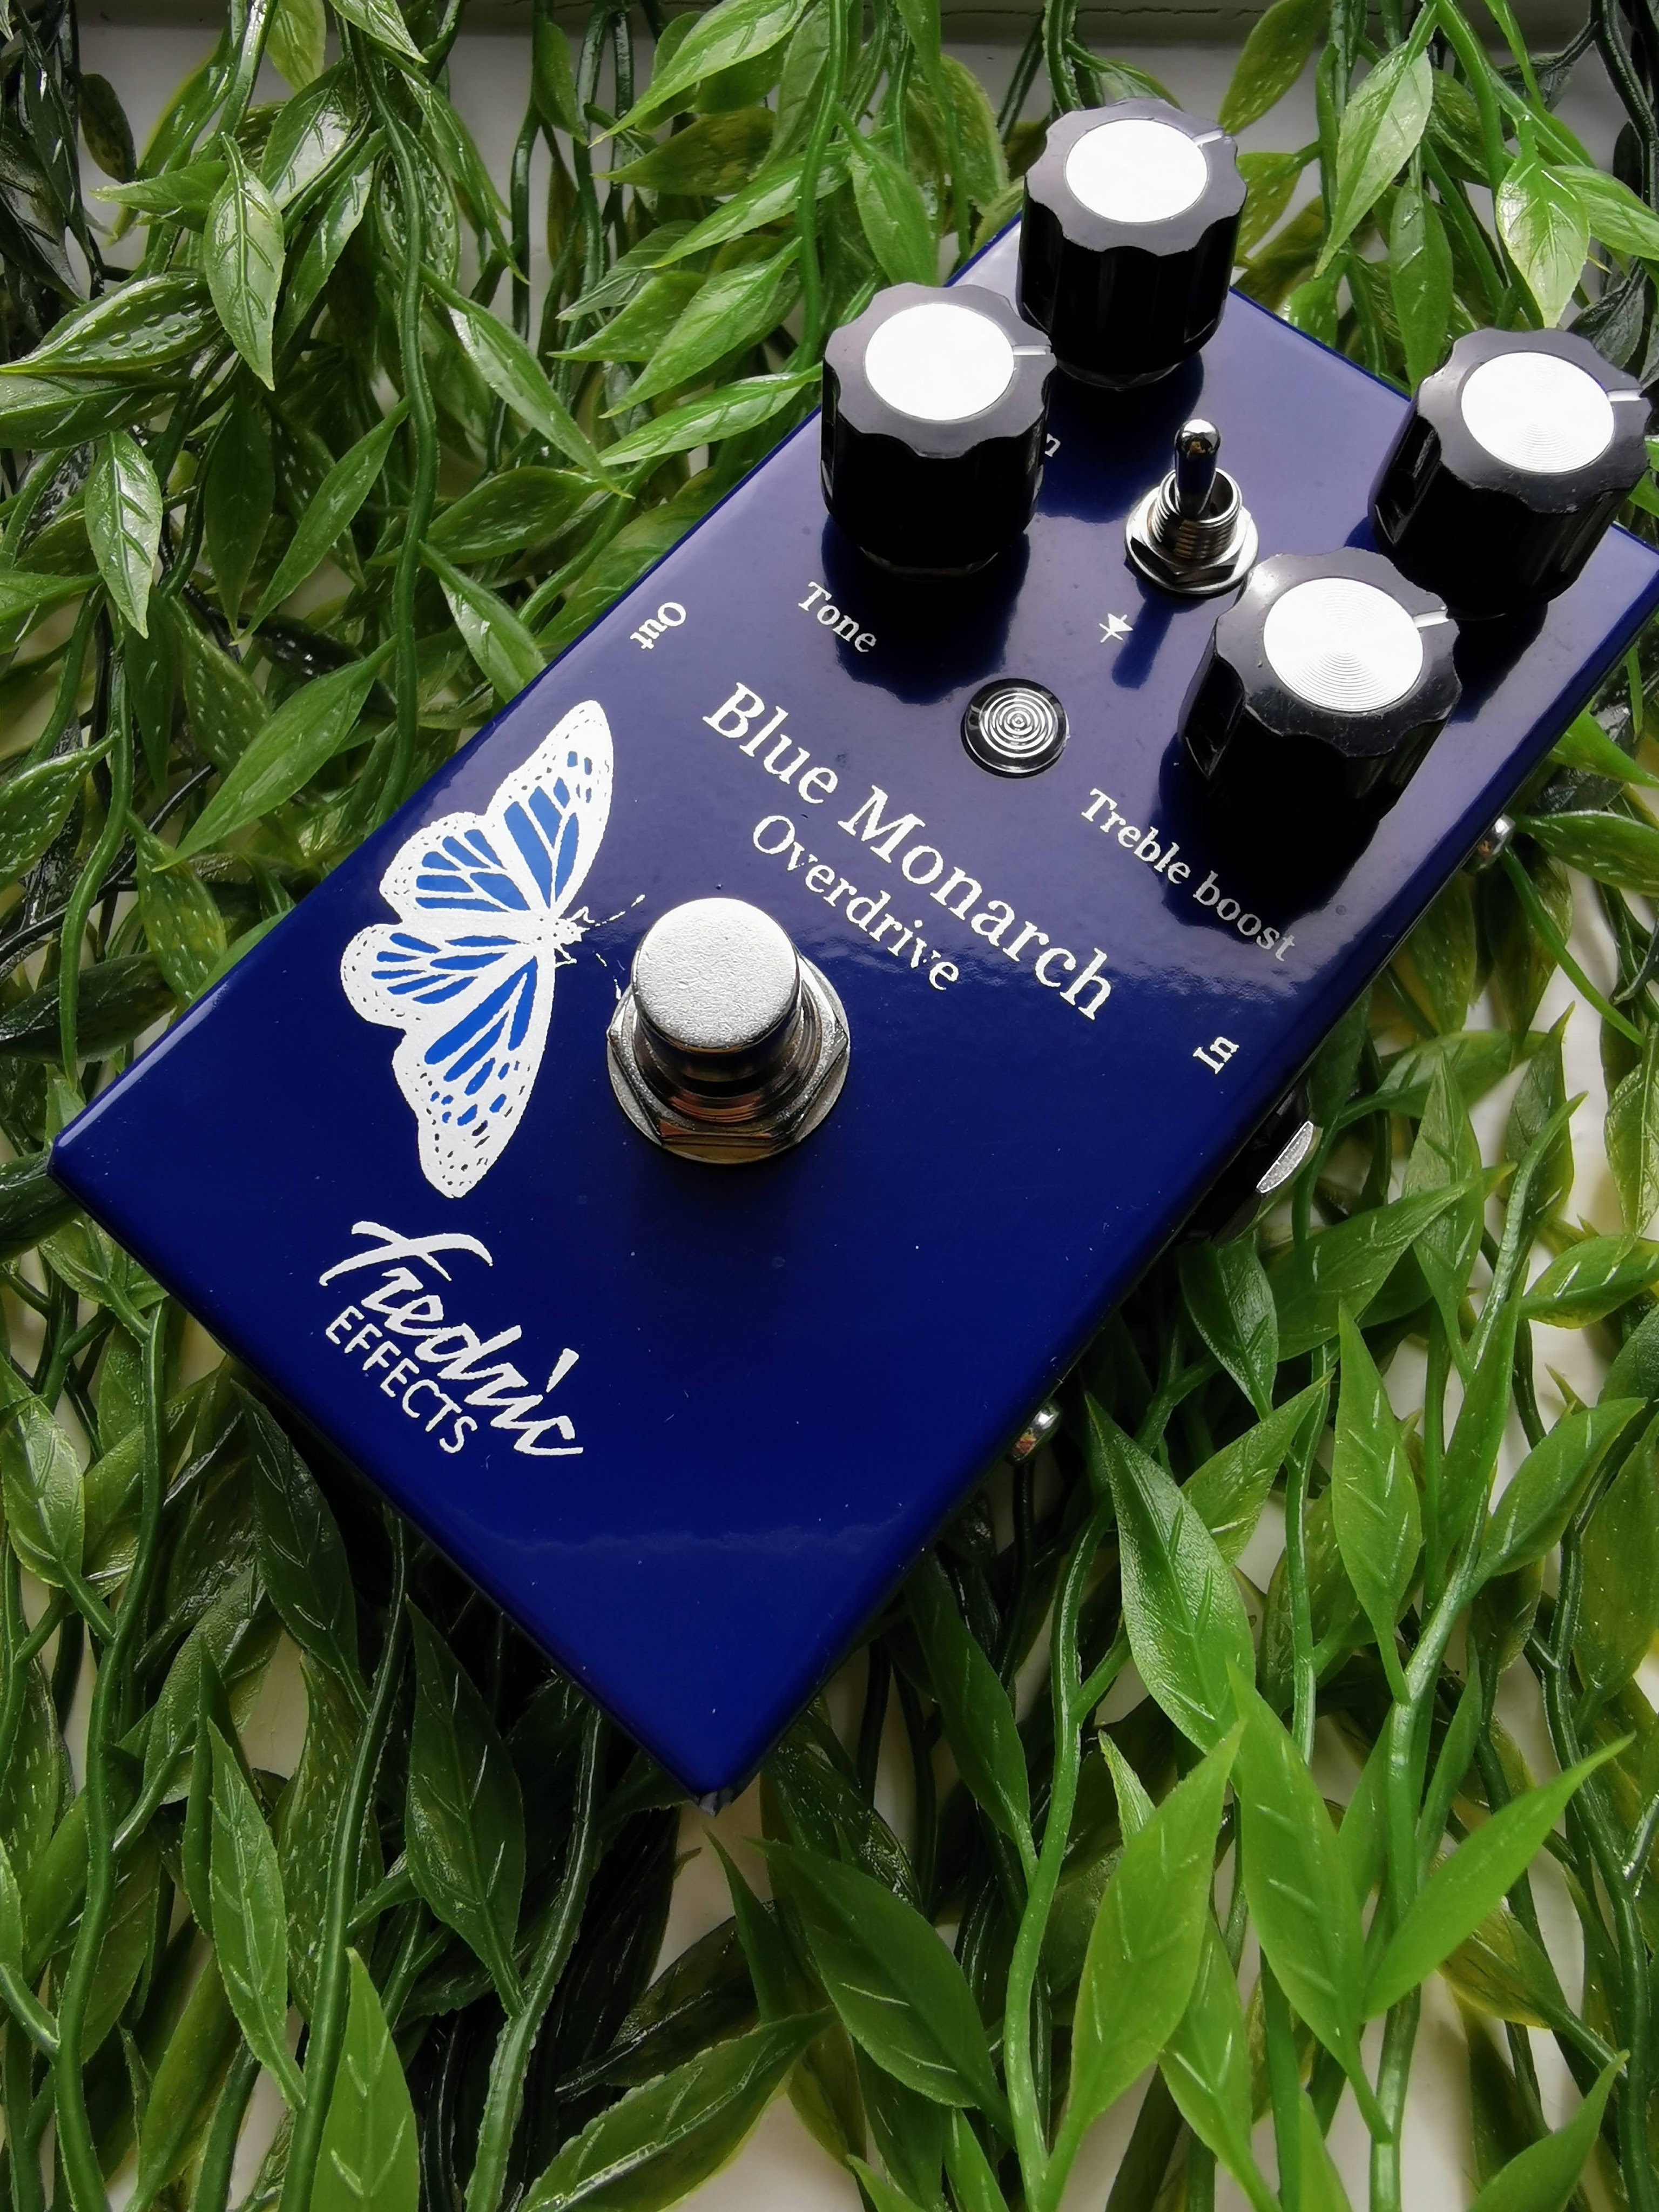 Flutter By Butterfly – Fredric Effects Blue Monarch – Pedal Post Blog